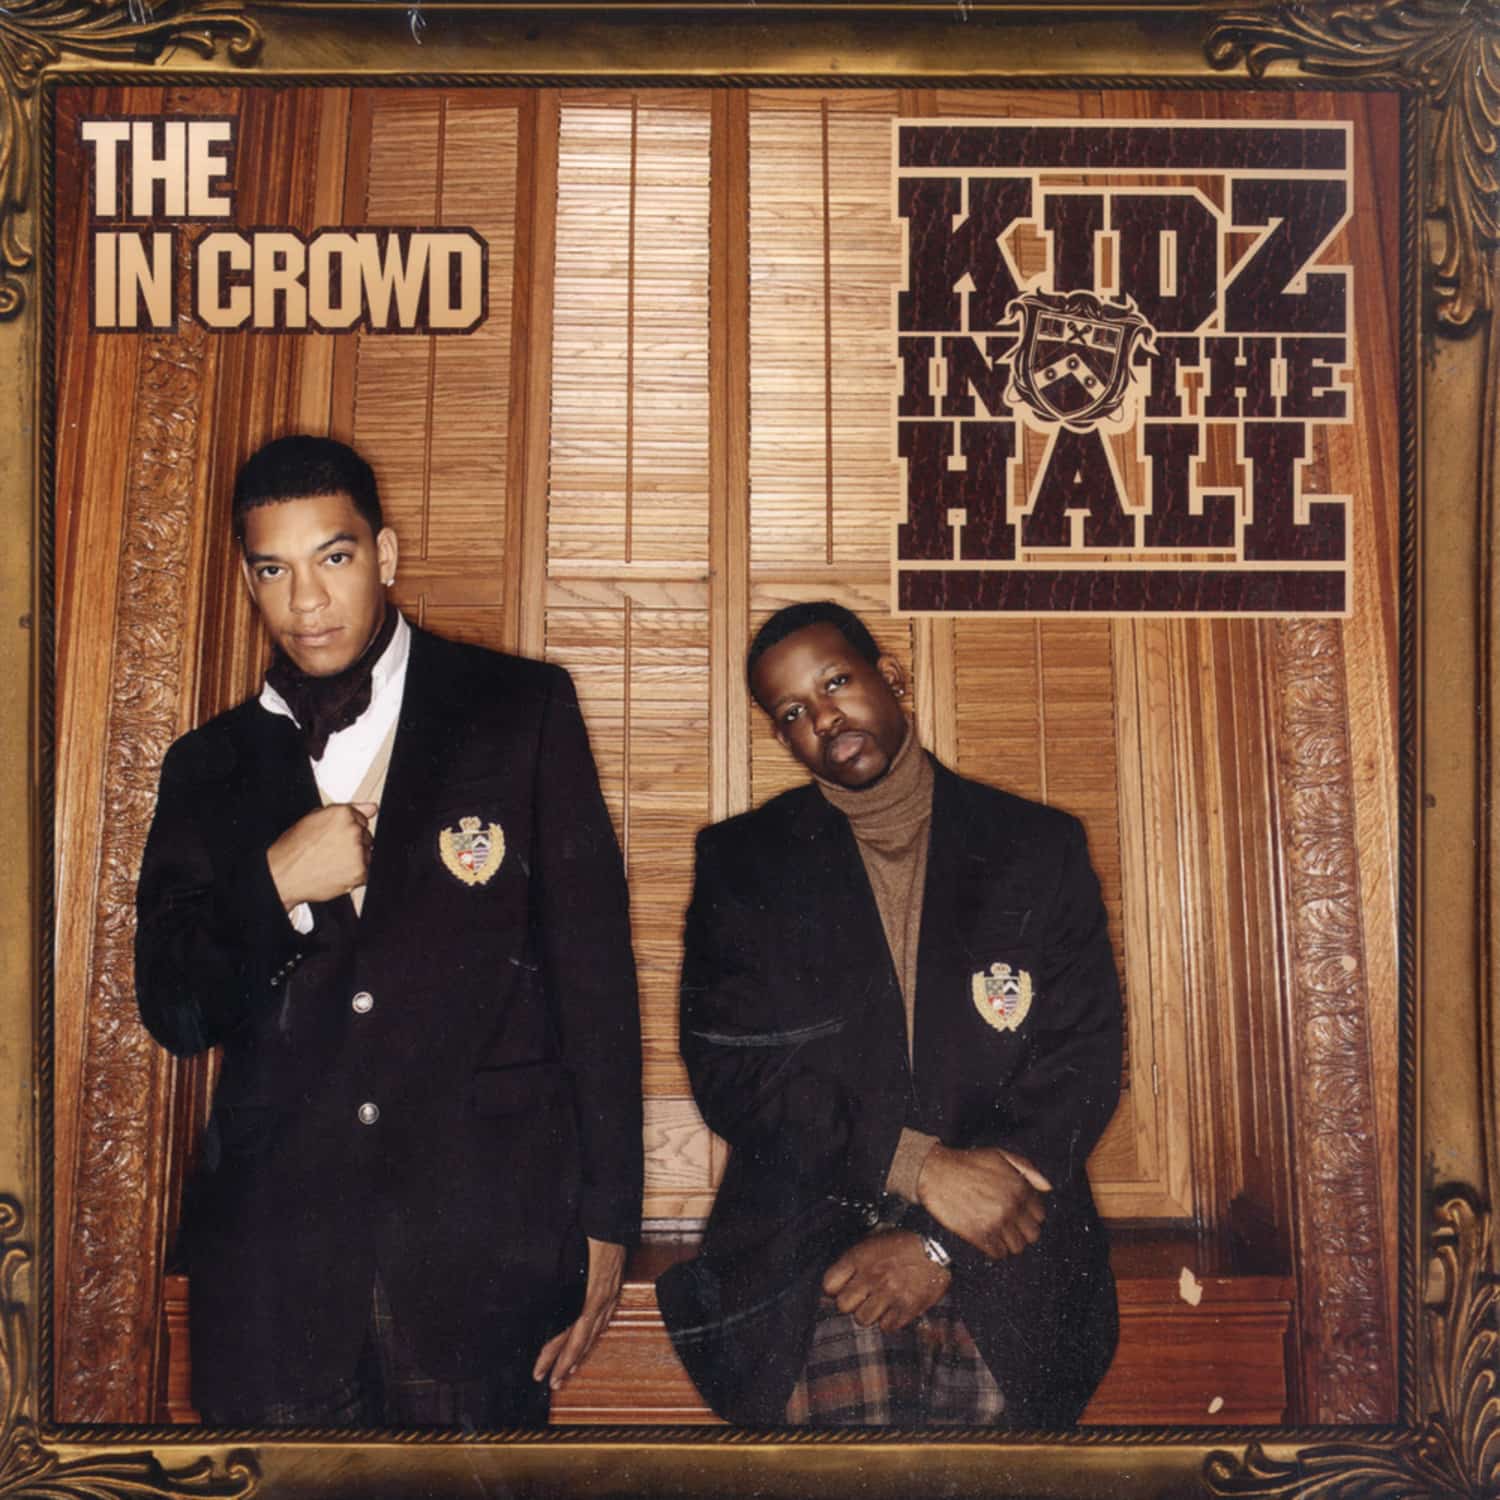 Kidz In The Hall - THE IN CROWD 